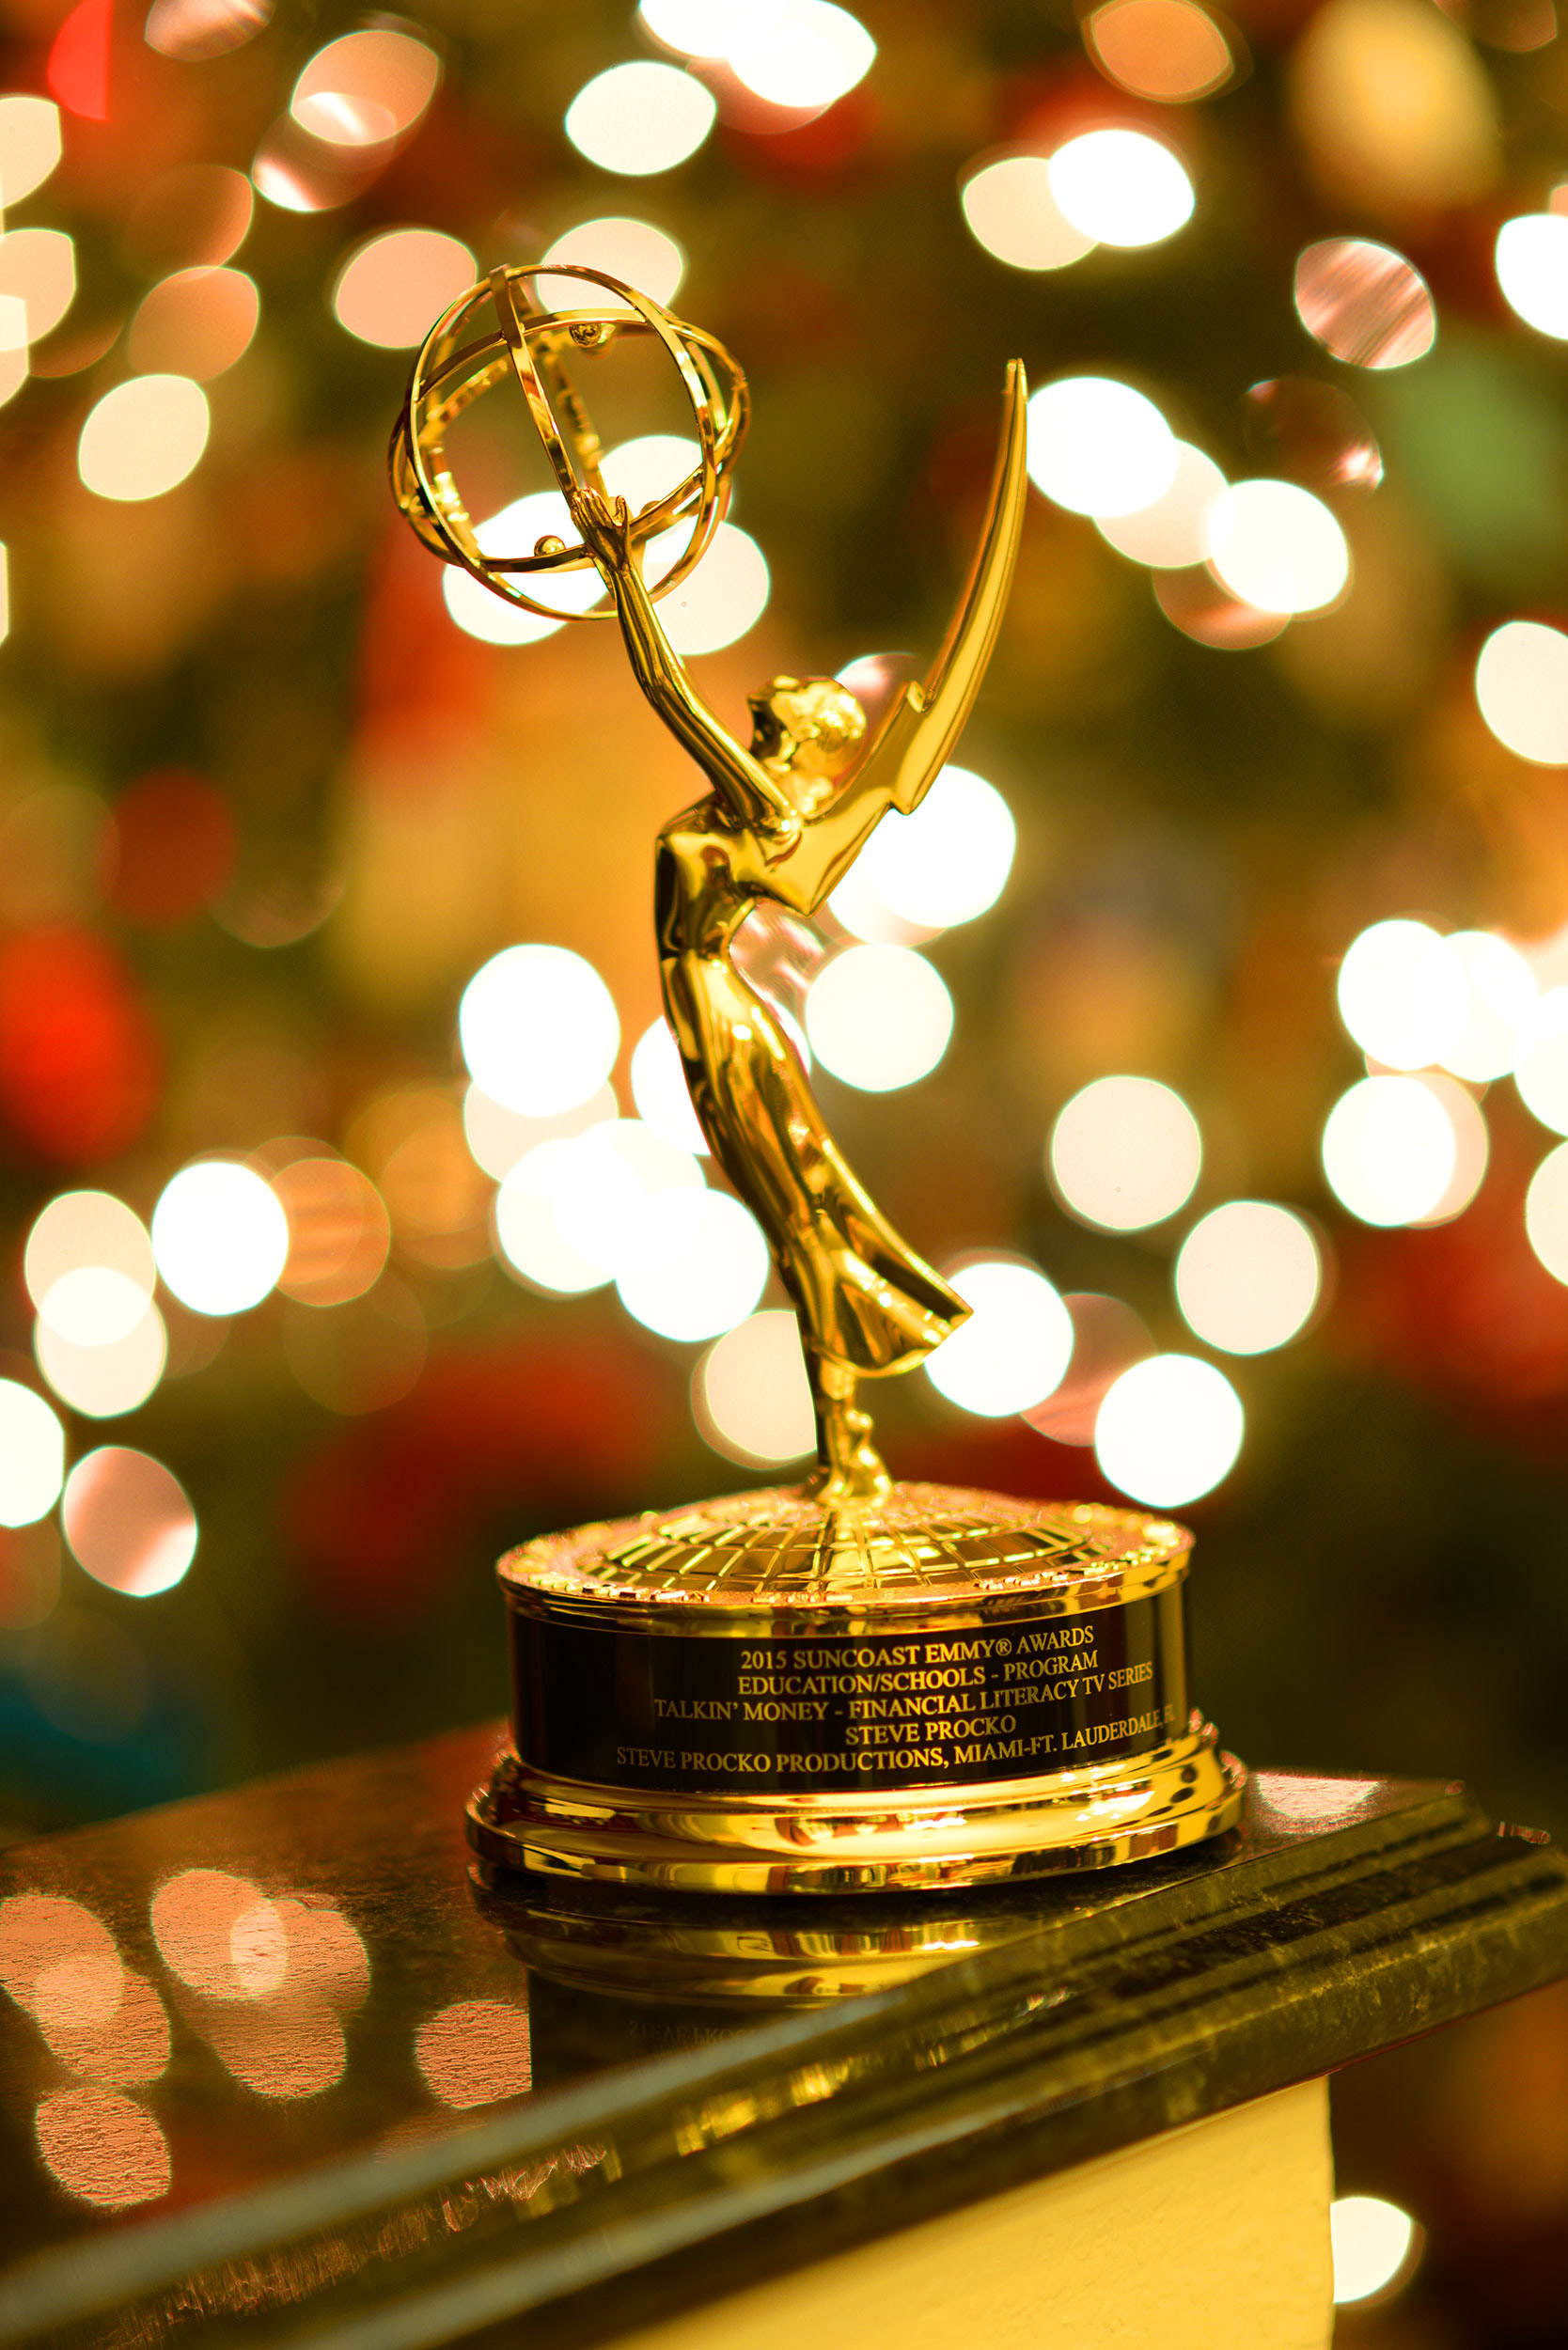 The National Academy of Television Arts and Sciences has awarded Steve Procko Productions an Emmy Award in the Educational Programming category for its Talkin Money Financial Literacy Educational Video program.